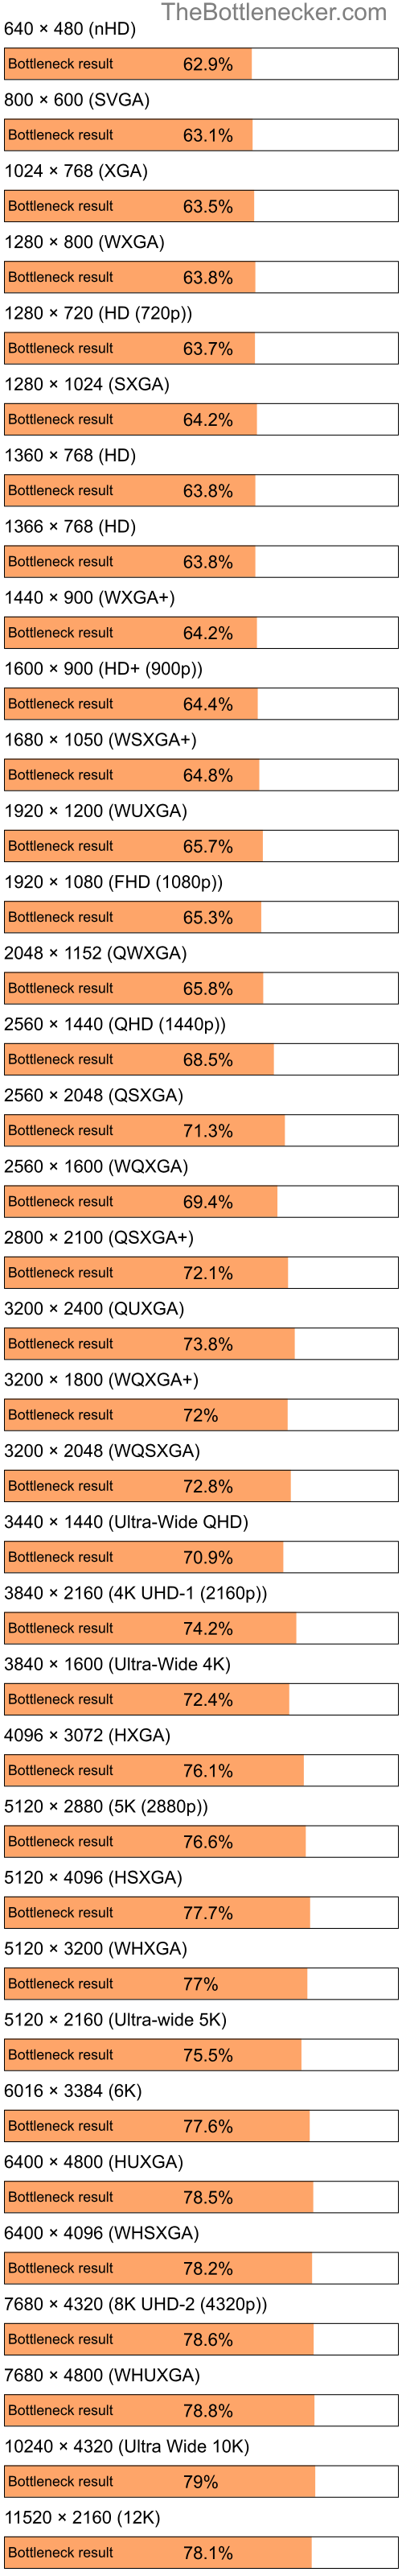 Bottleneck results by resolution for Intel Pentium 4 and AMD M860G with Mobility Radeon 4100 in General Tasks